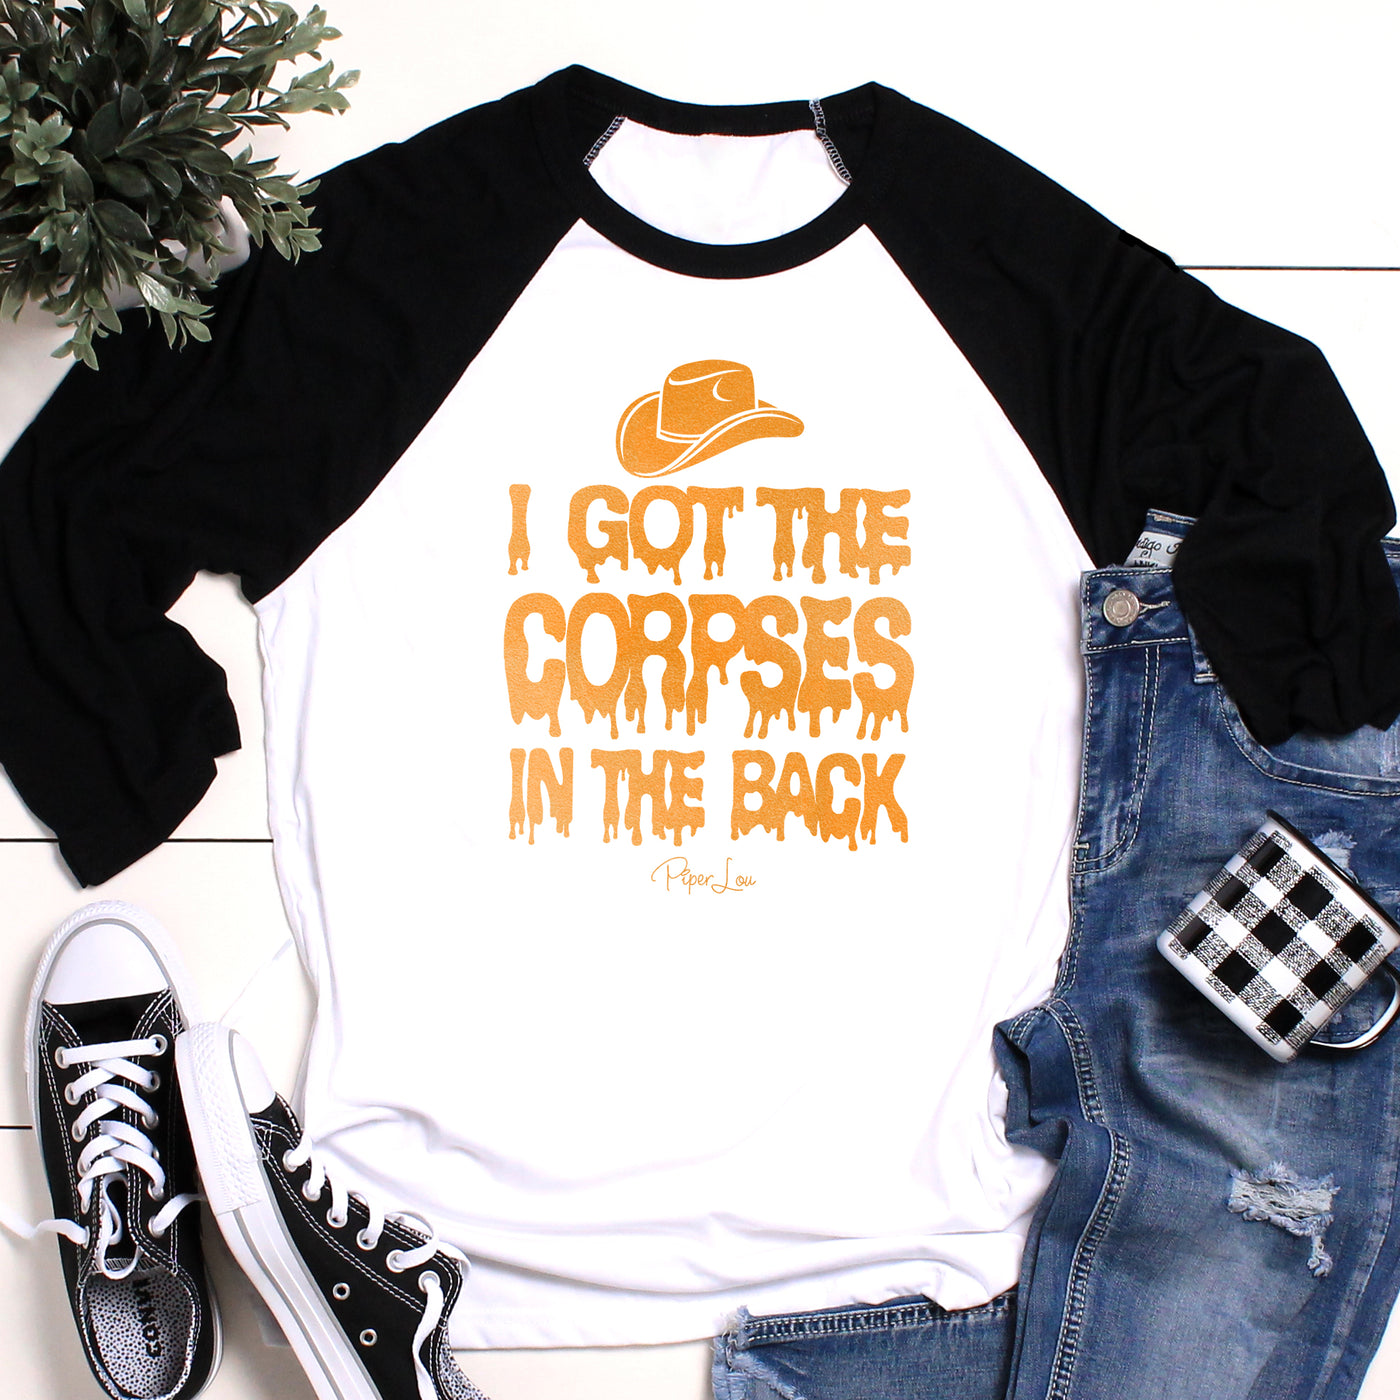 Halloween Apparel | I Got the Corpses in the Back